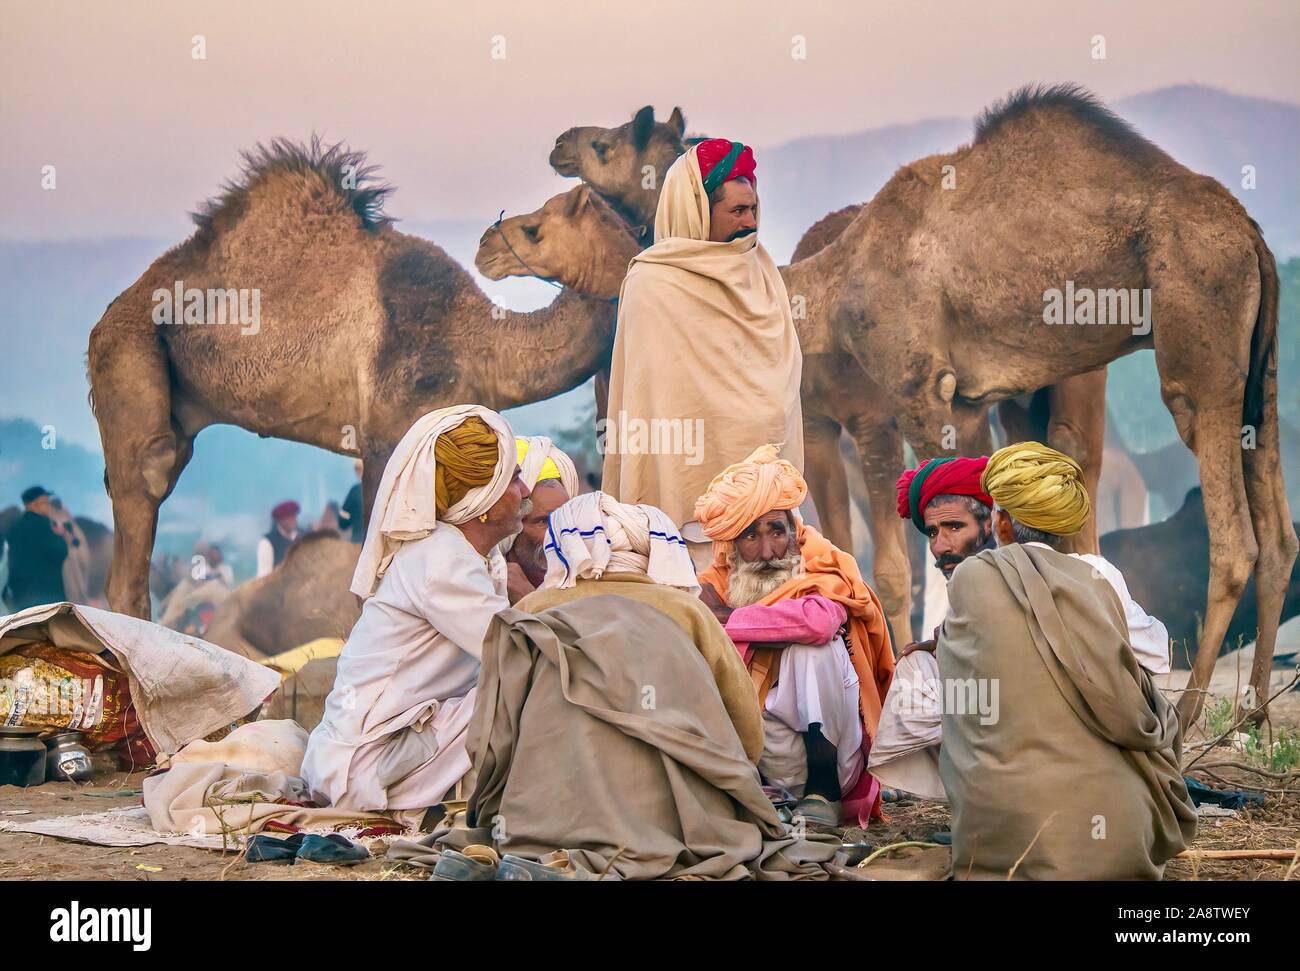 A group of Rajasthani camel herders sitting in their temporary desert camp at dawn, during the Pushkar Camel Fair in Rajasthan, India. Stock Photo